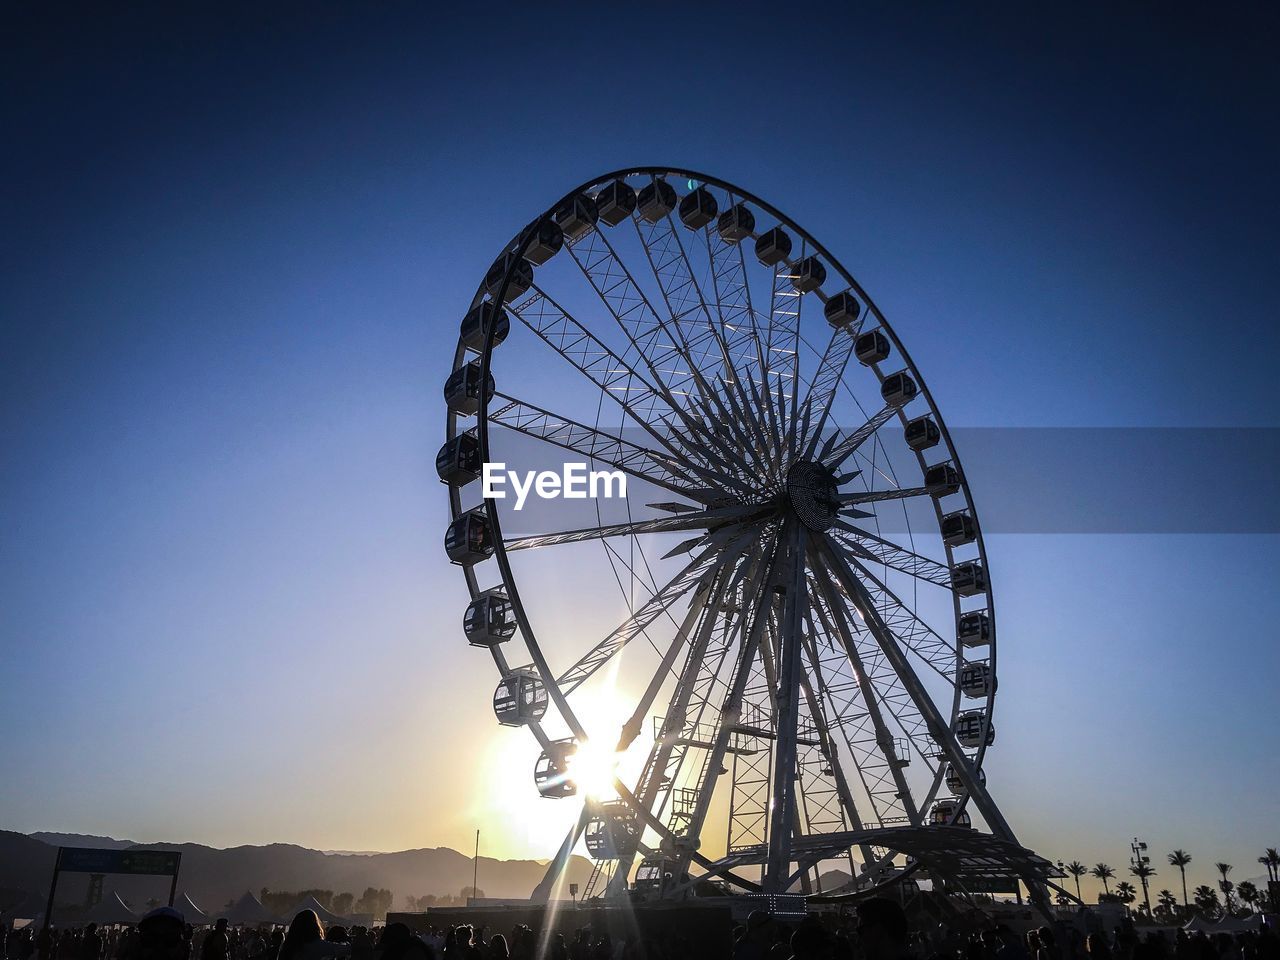 LOW ANGLE VIEW OF FERRIS WHEEL AGAINST CLEAR BLUE SKY